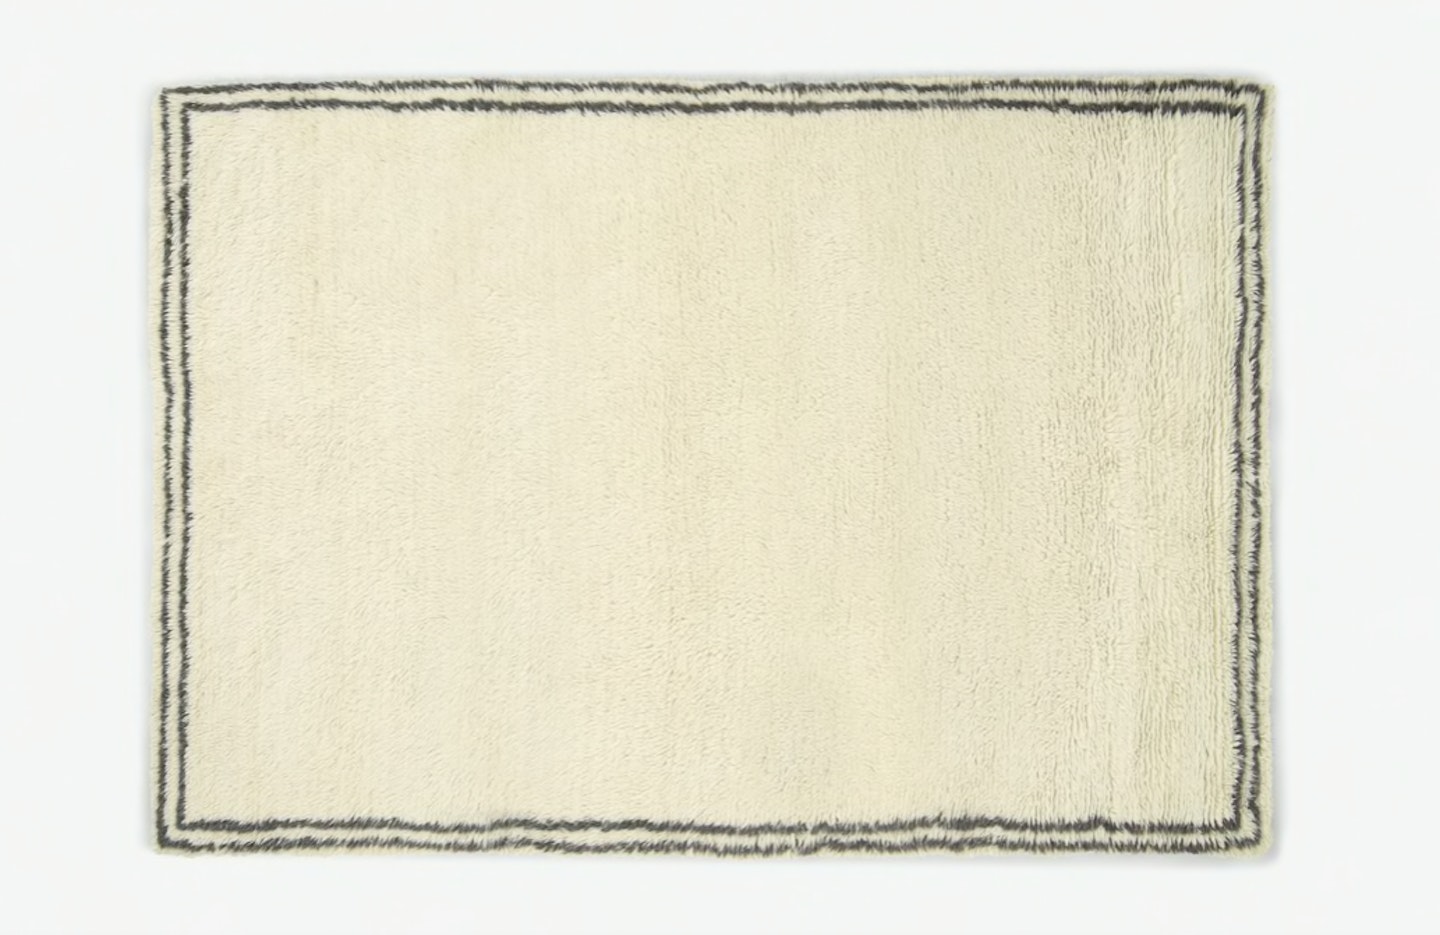 MADE, Heijer Washed Shaggy 100% Wool Rug, Large 160 x 230 cm, Off-White & Black, WAS £385 NOW £195